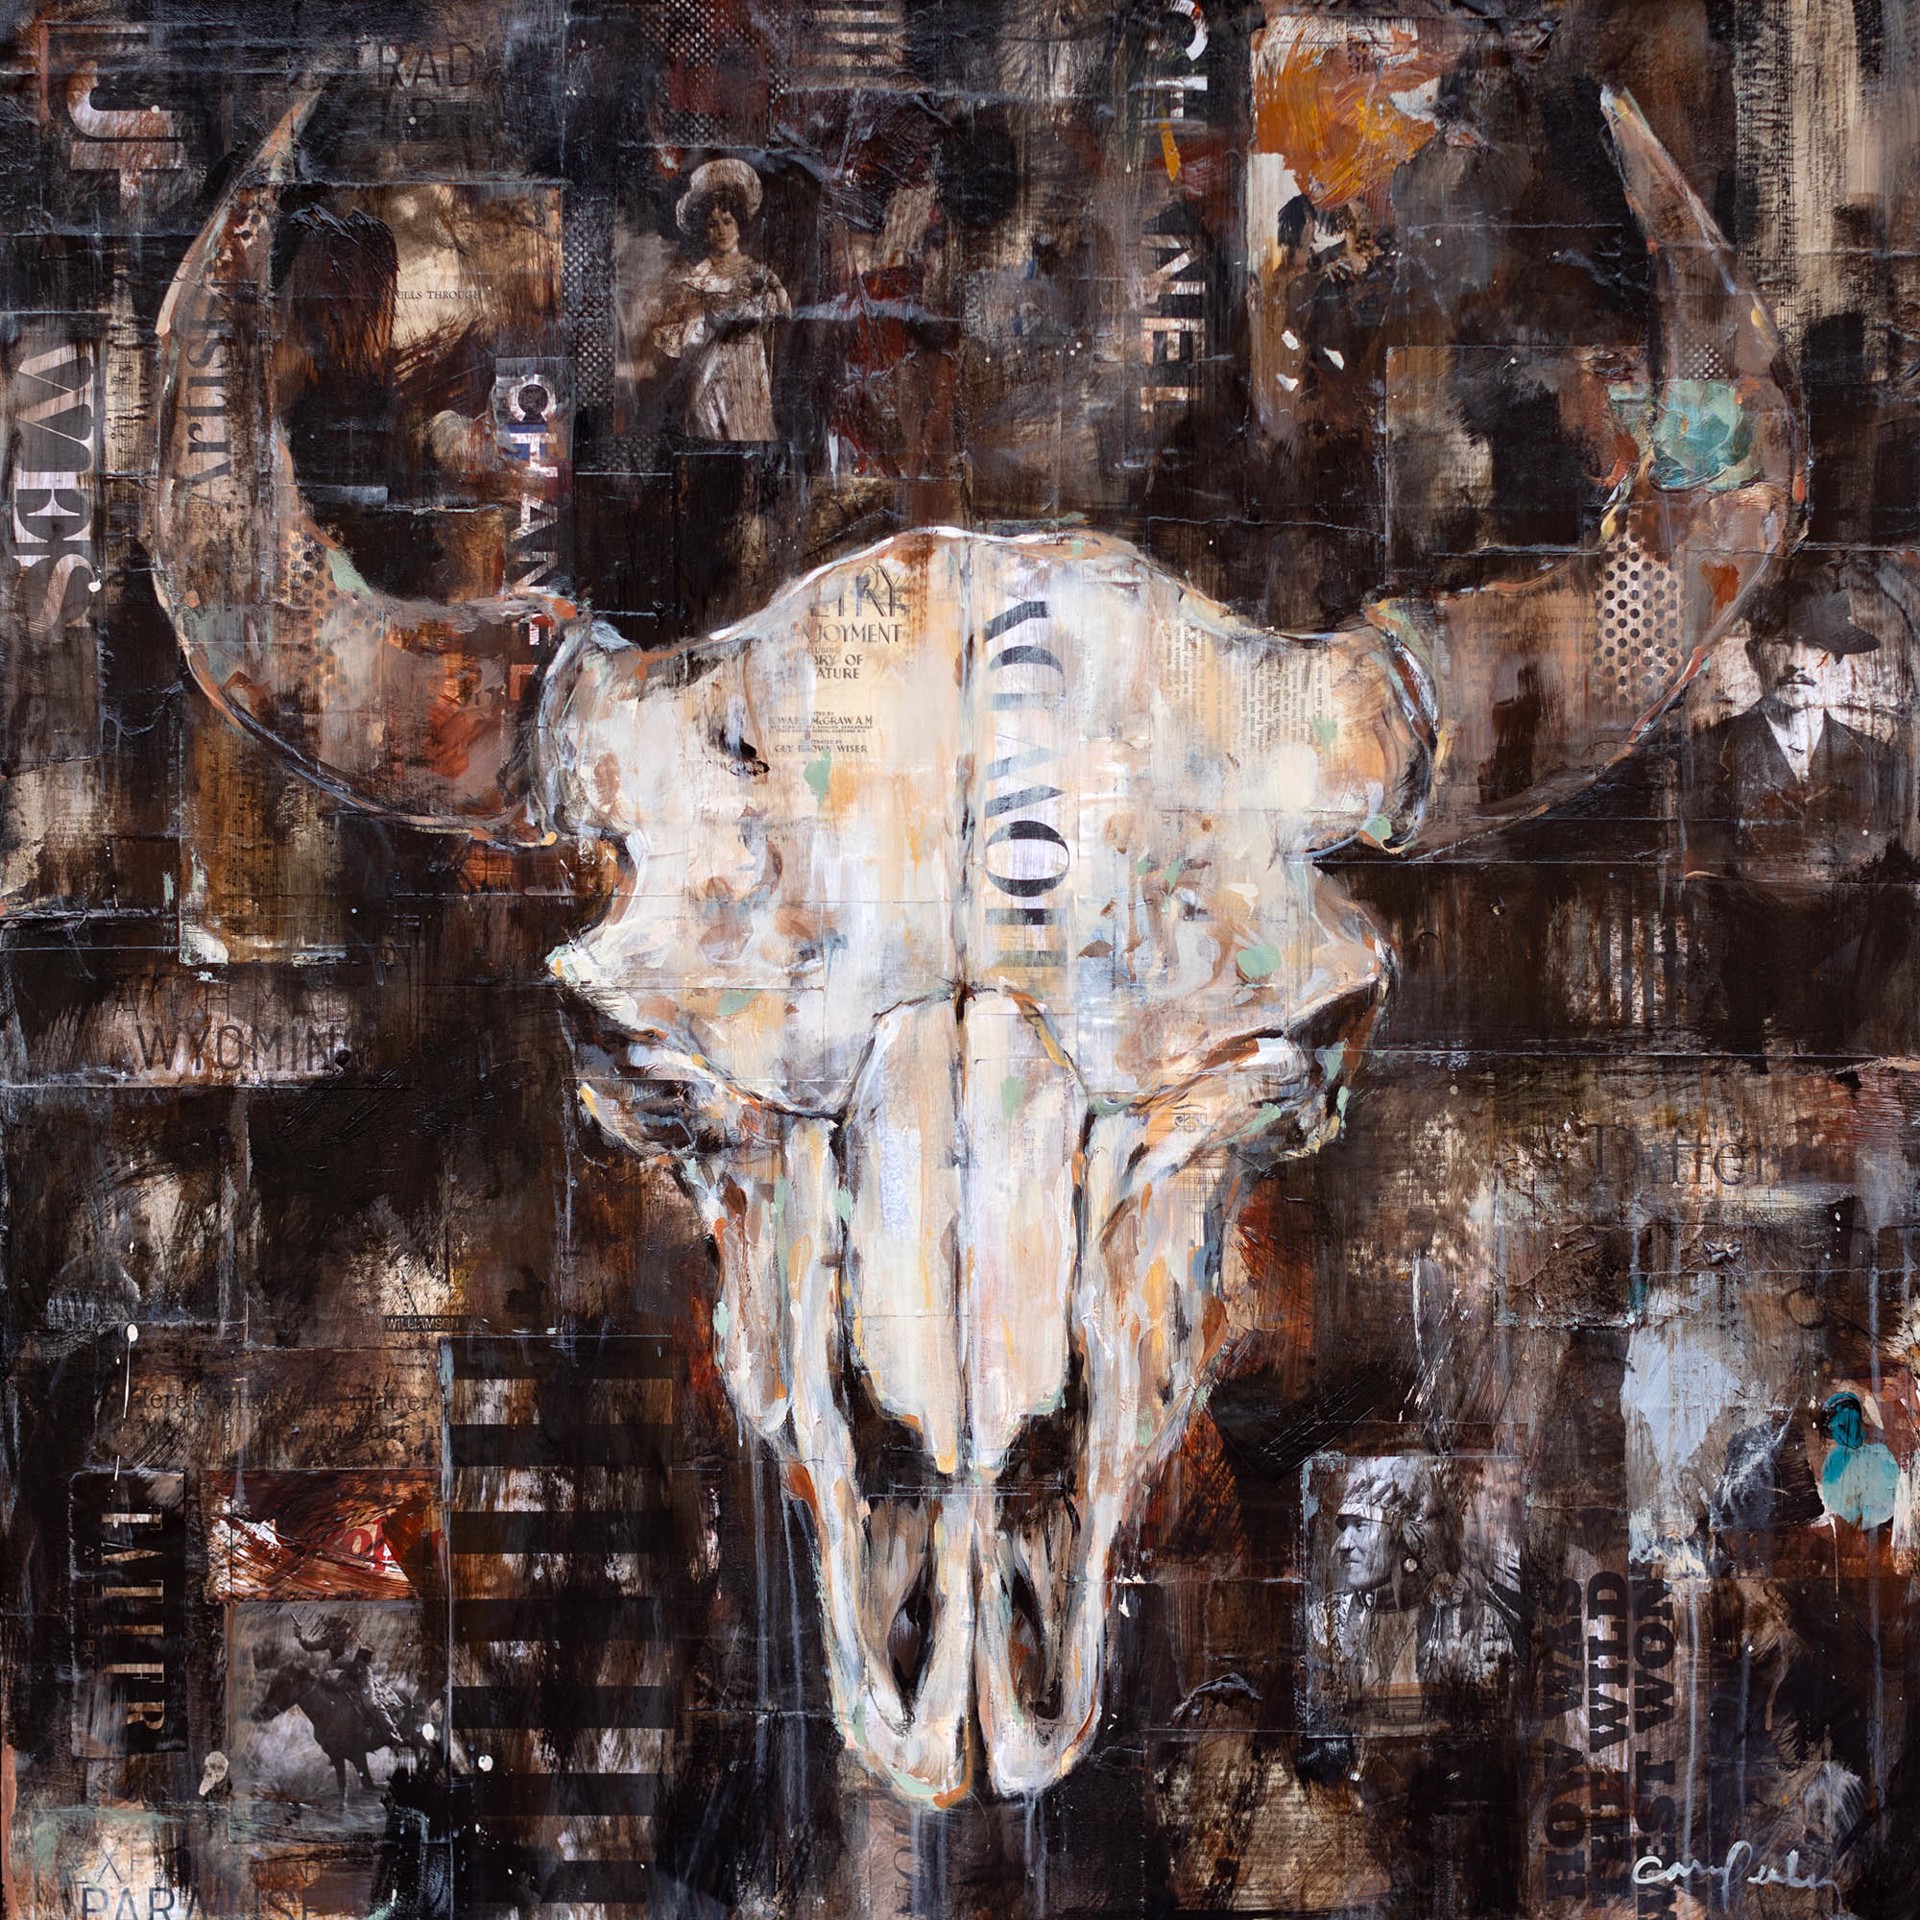 Original Mixed Media Painting By Carrie Penley Featuring A Cow Skull On Black Background